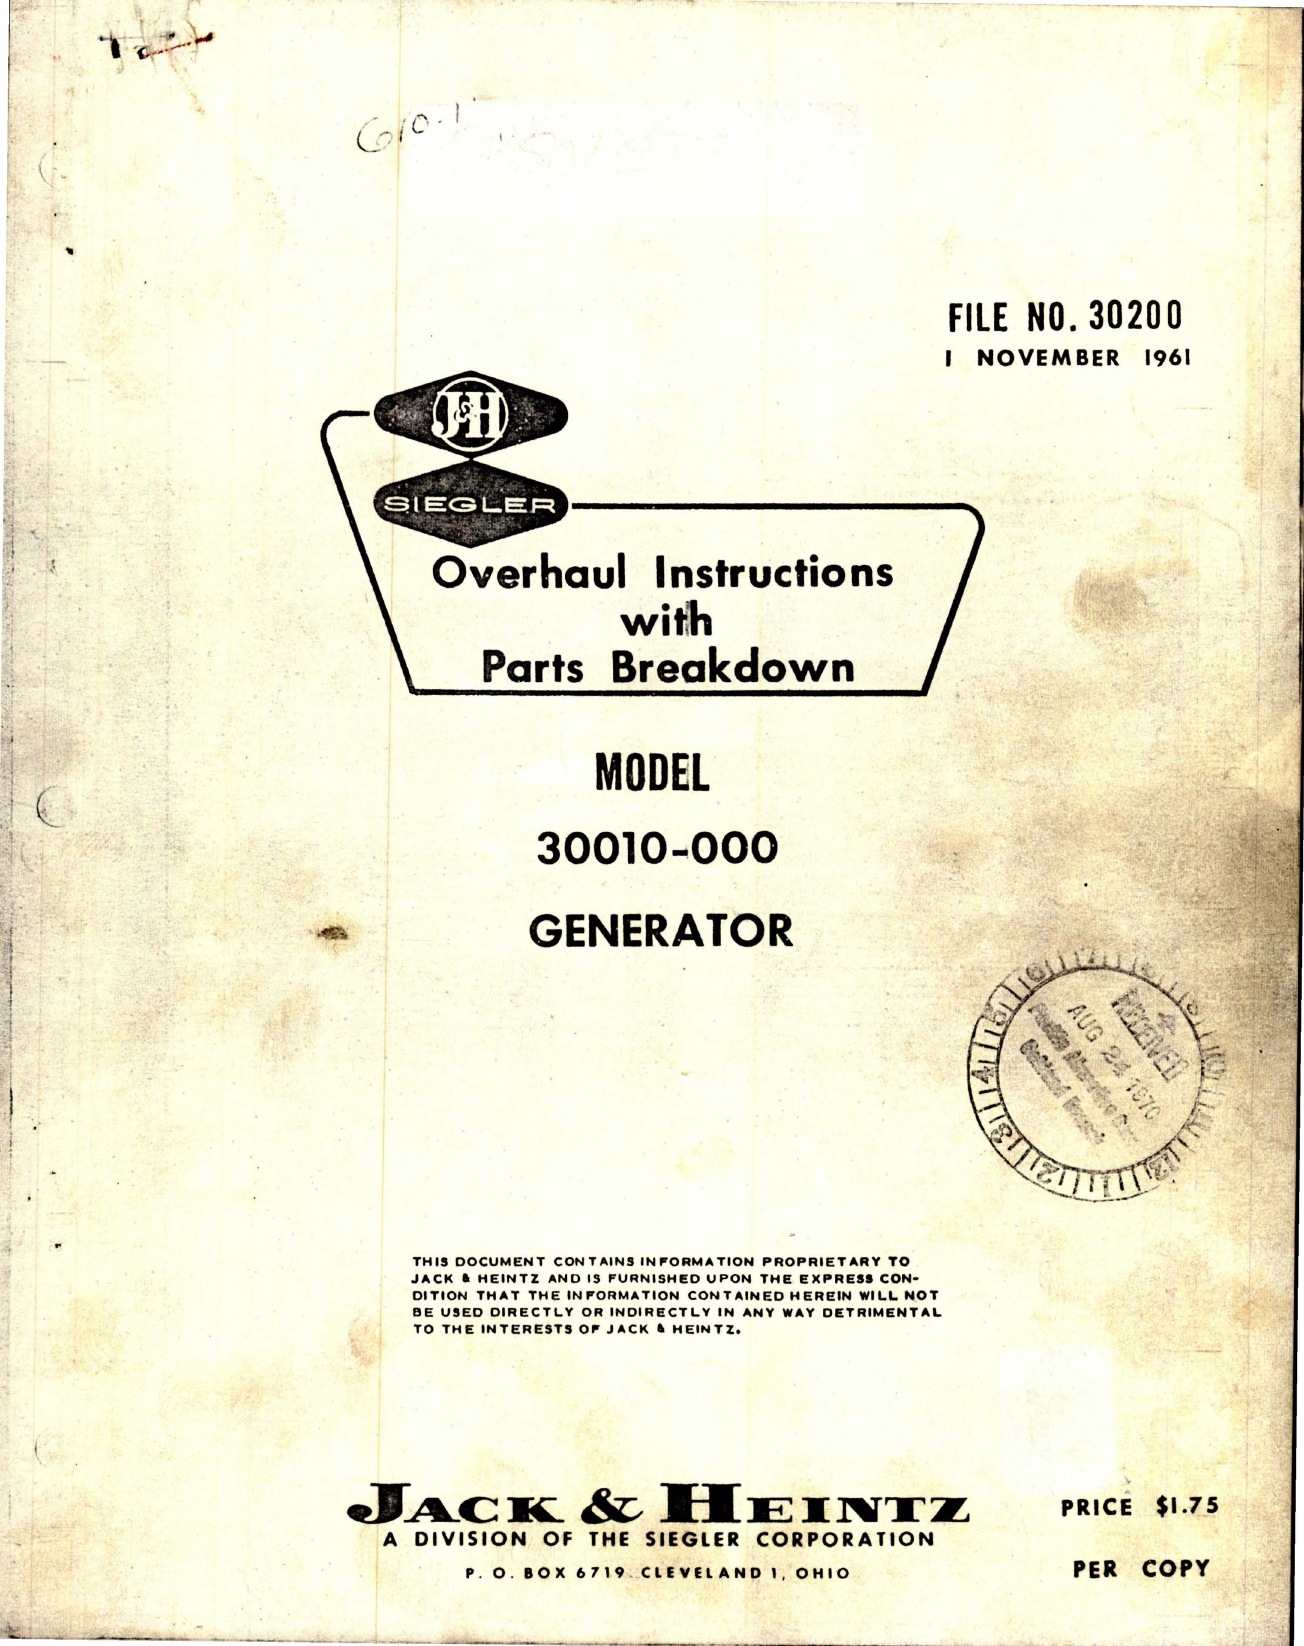 Sample page 1 from AirCorps Library document: Overhaul Instructions with Parts for Generator - Model 30010-000 